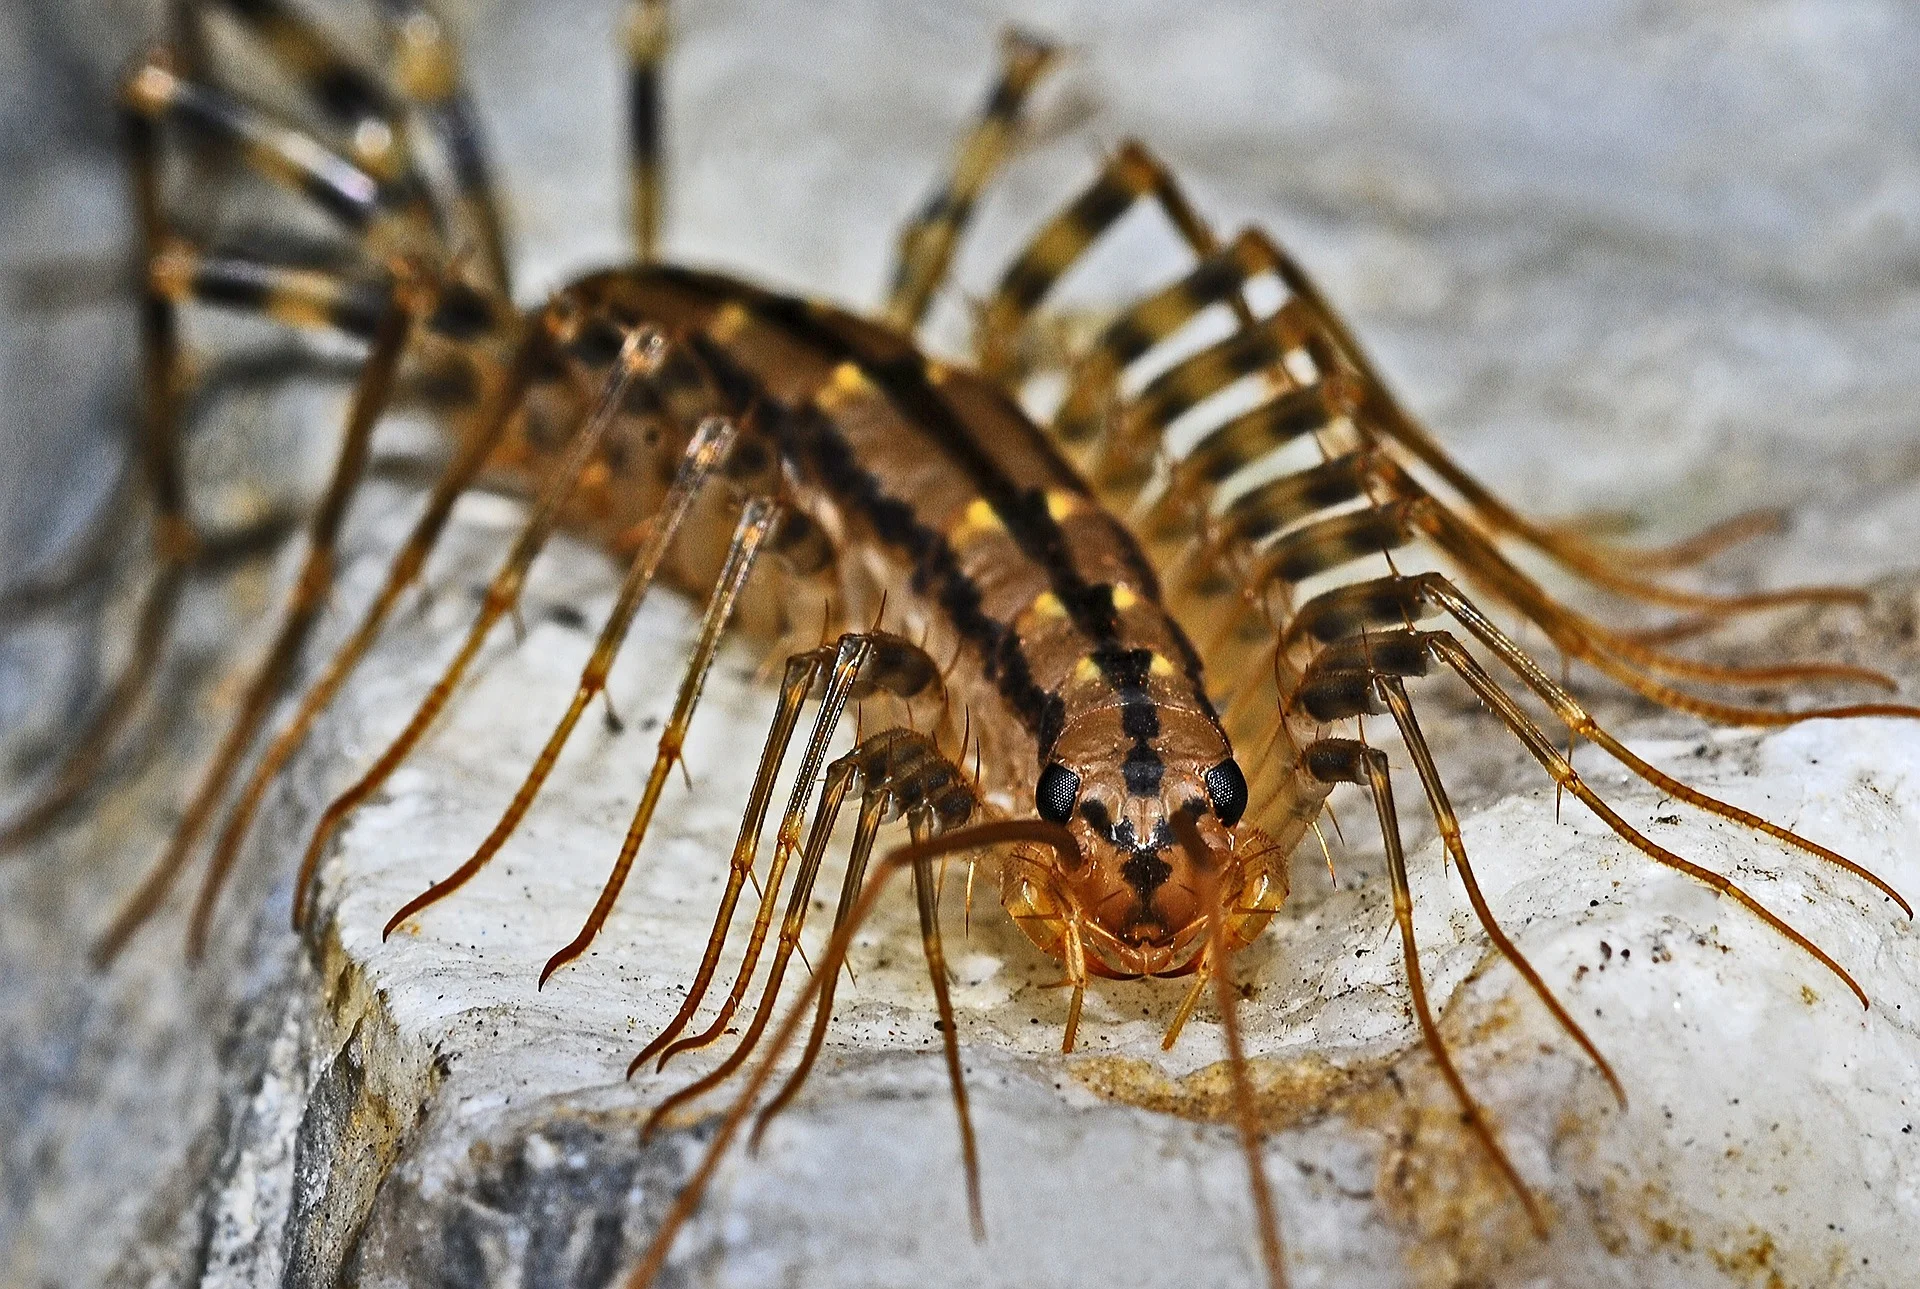 Why we see more creepy crawlies in our homes this time of year